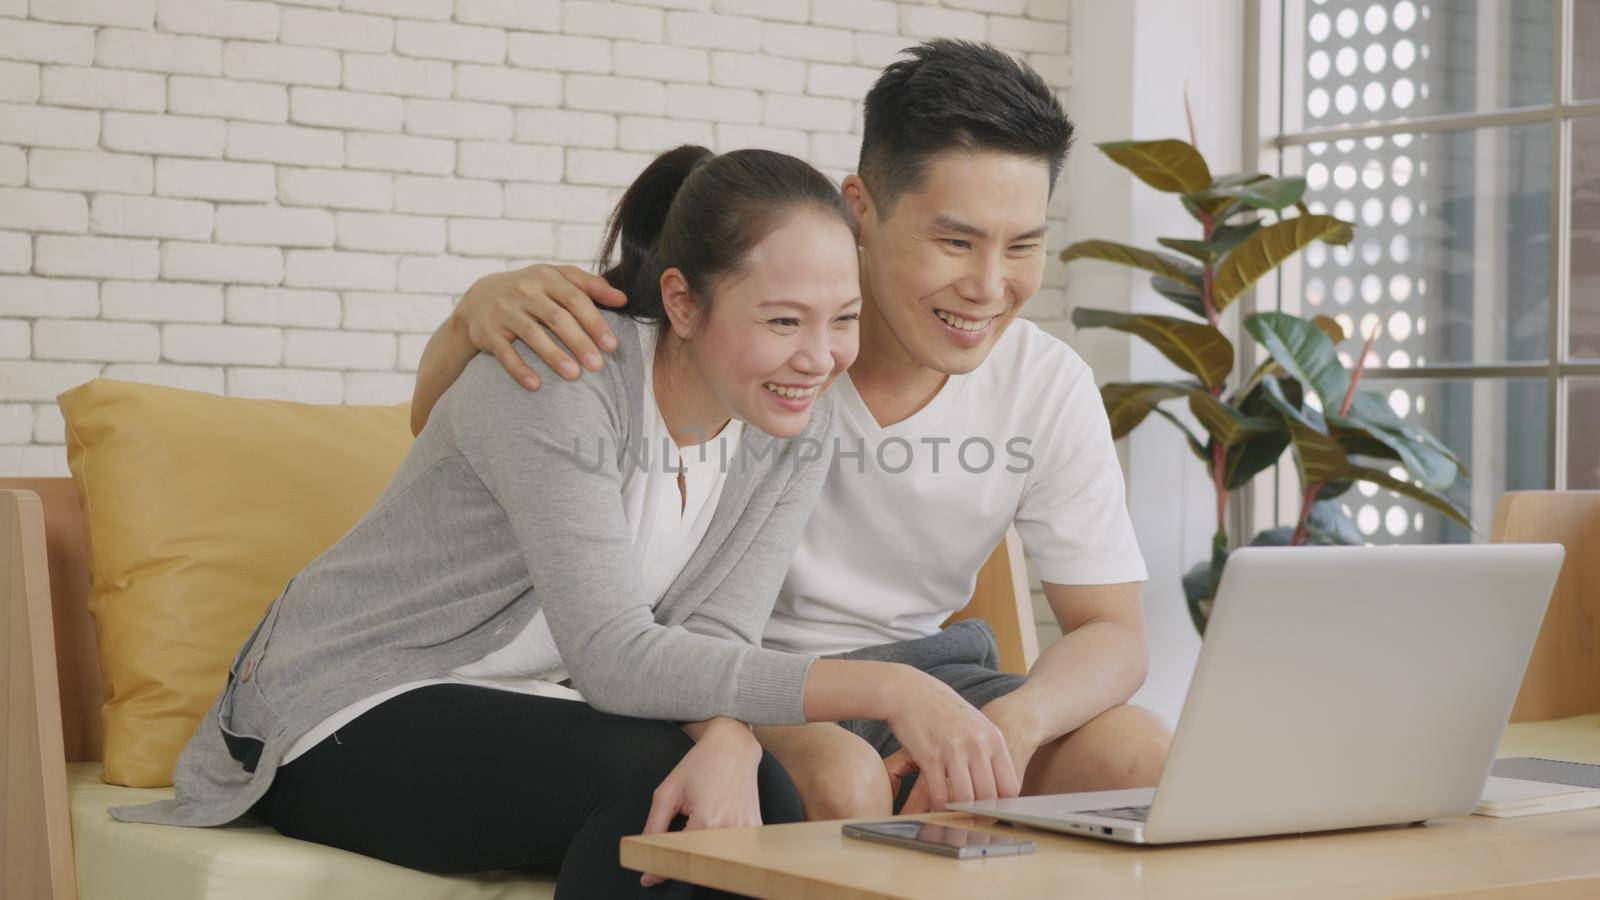 Happy Asian family couple husband and wife laughing sitting on sofa using laptop computer webcam technology talking making online social distance video call to their children at home.